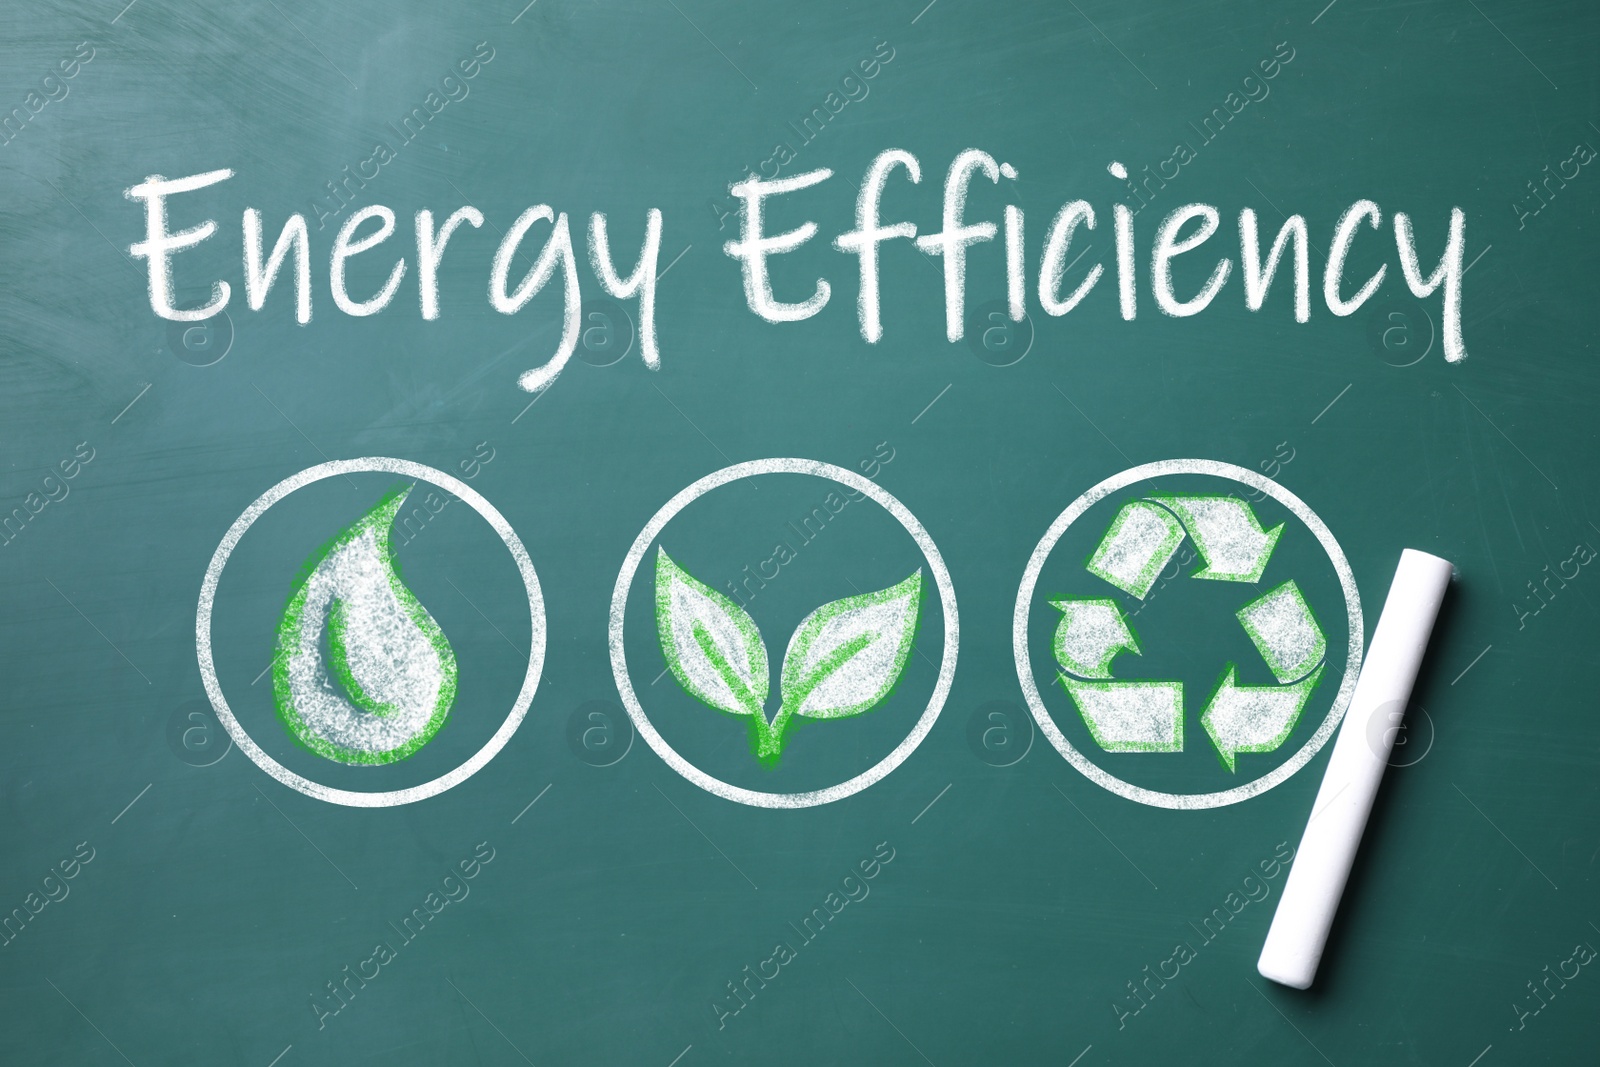 Image of Text ENERGY EFFICIENCY and different icons drawn on chalkboard